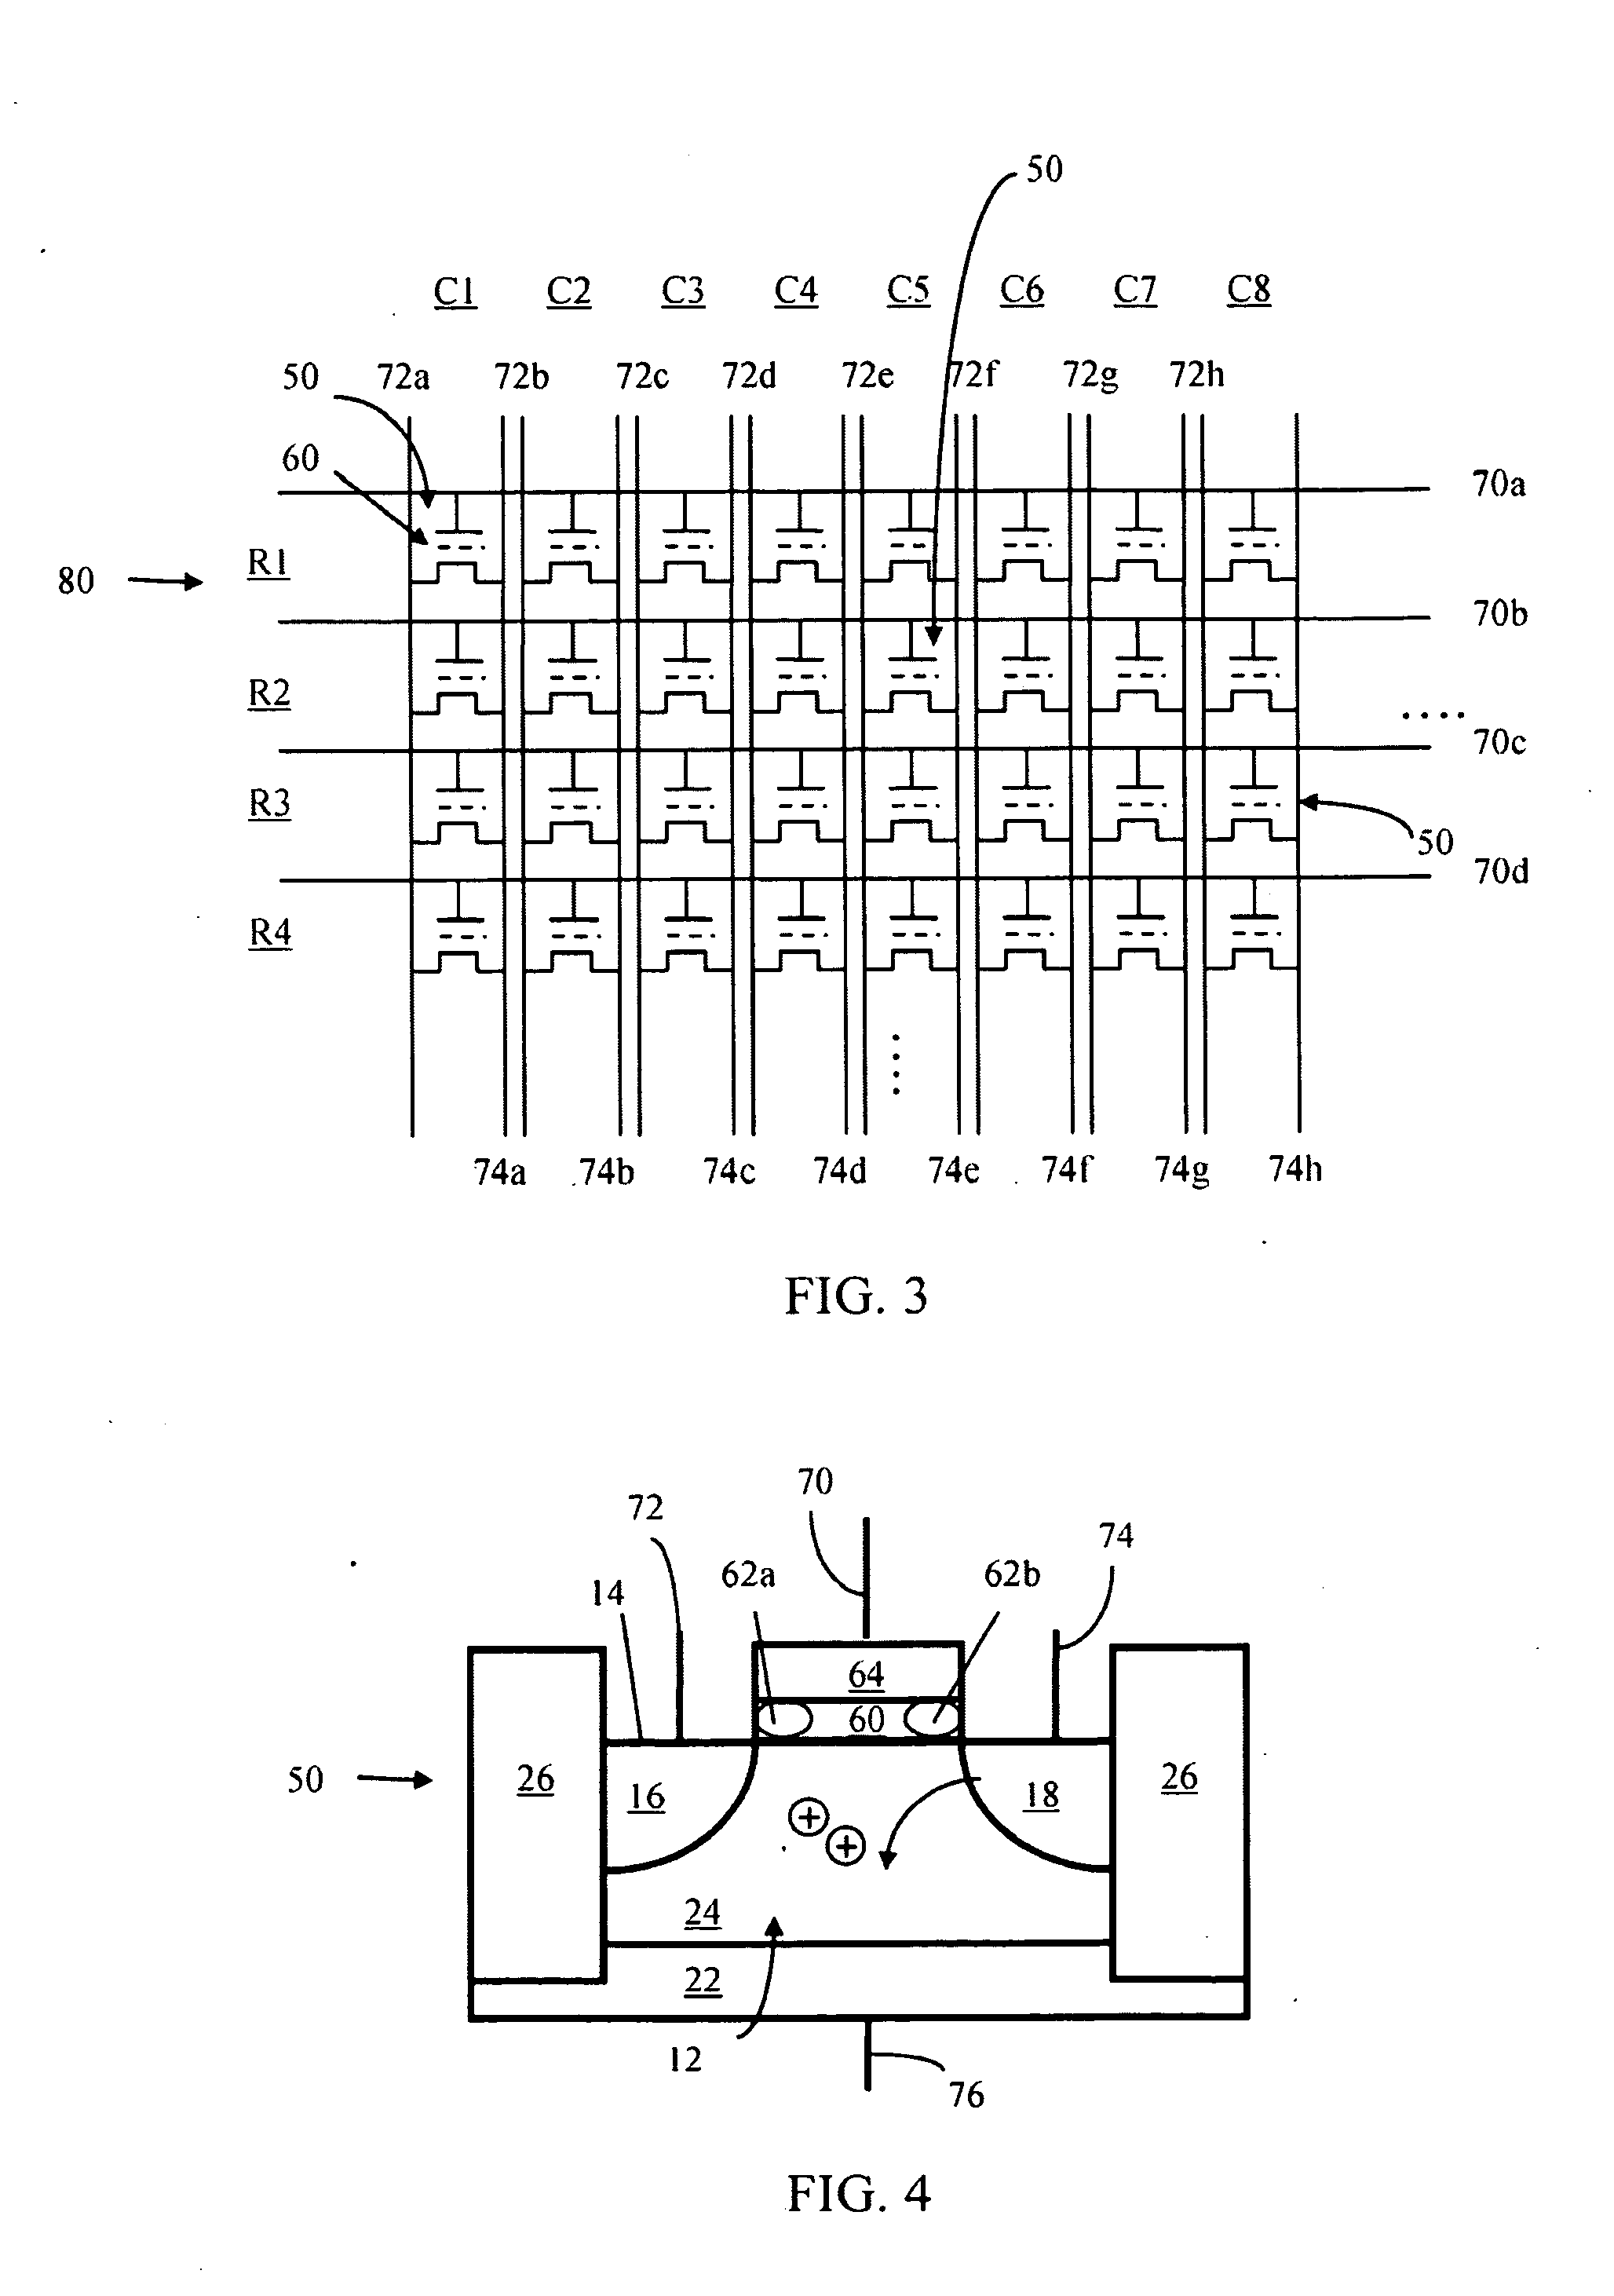 Semiconductor memory having volatile and multi-bit, non-volatile functionality and methods of operating